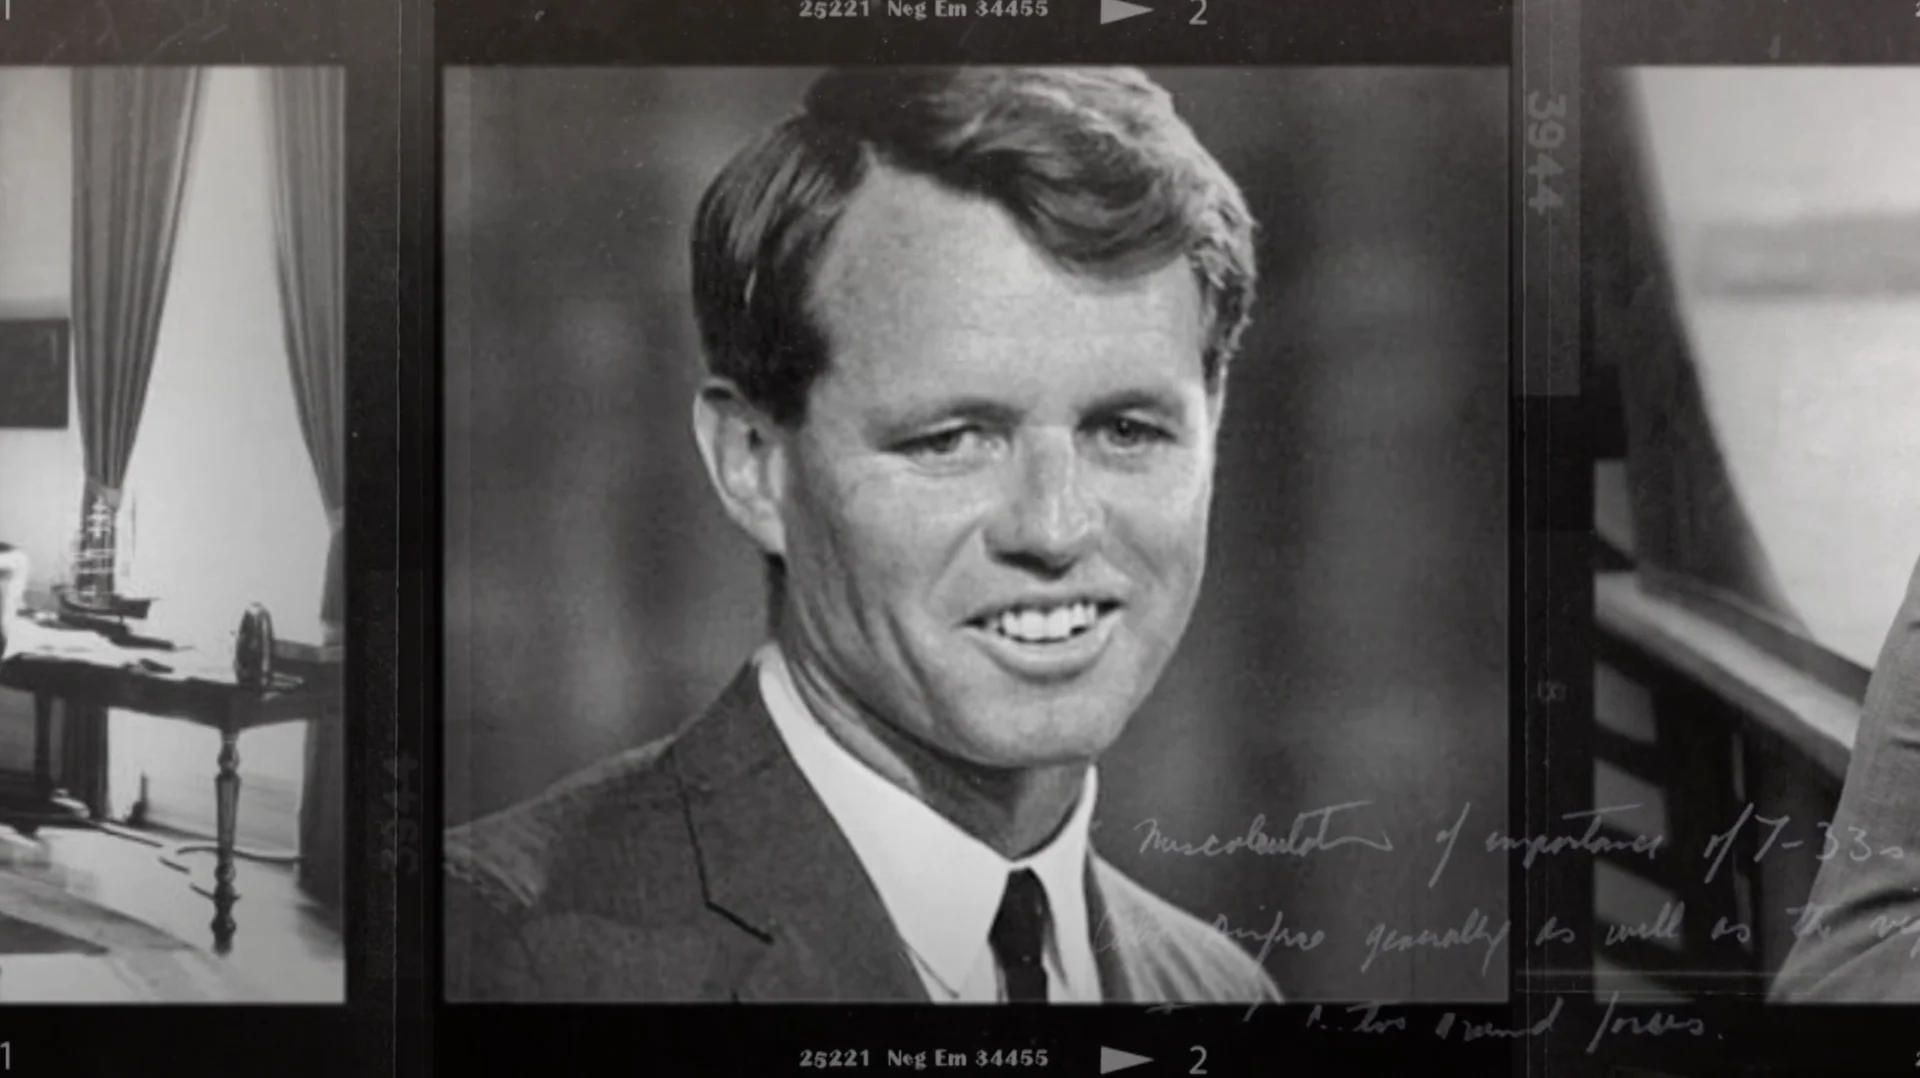 In observance of the 50th anniversary of Robert F. Kennedy's death, we partnered with AEO for History's film to create a graphics package that would commemorate his life and accomplishments.